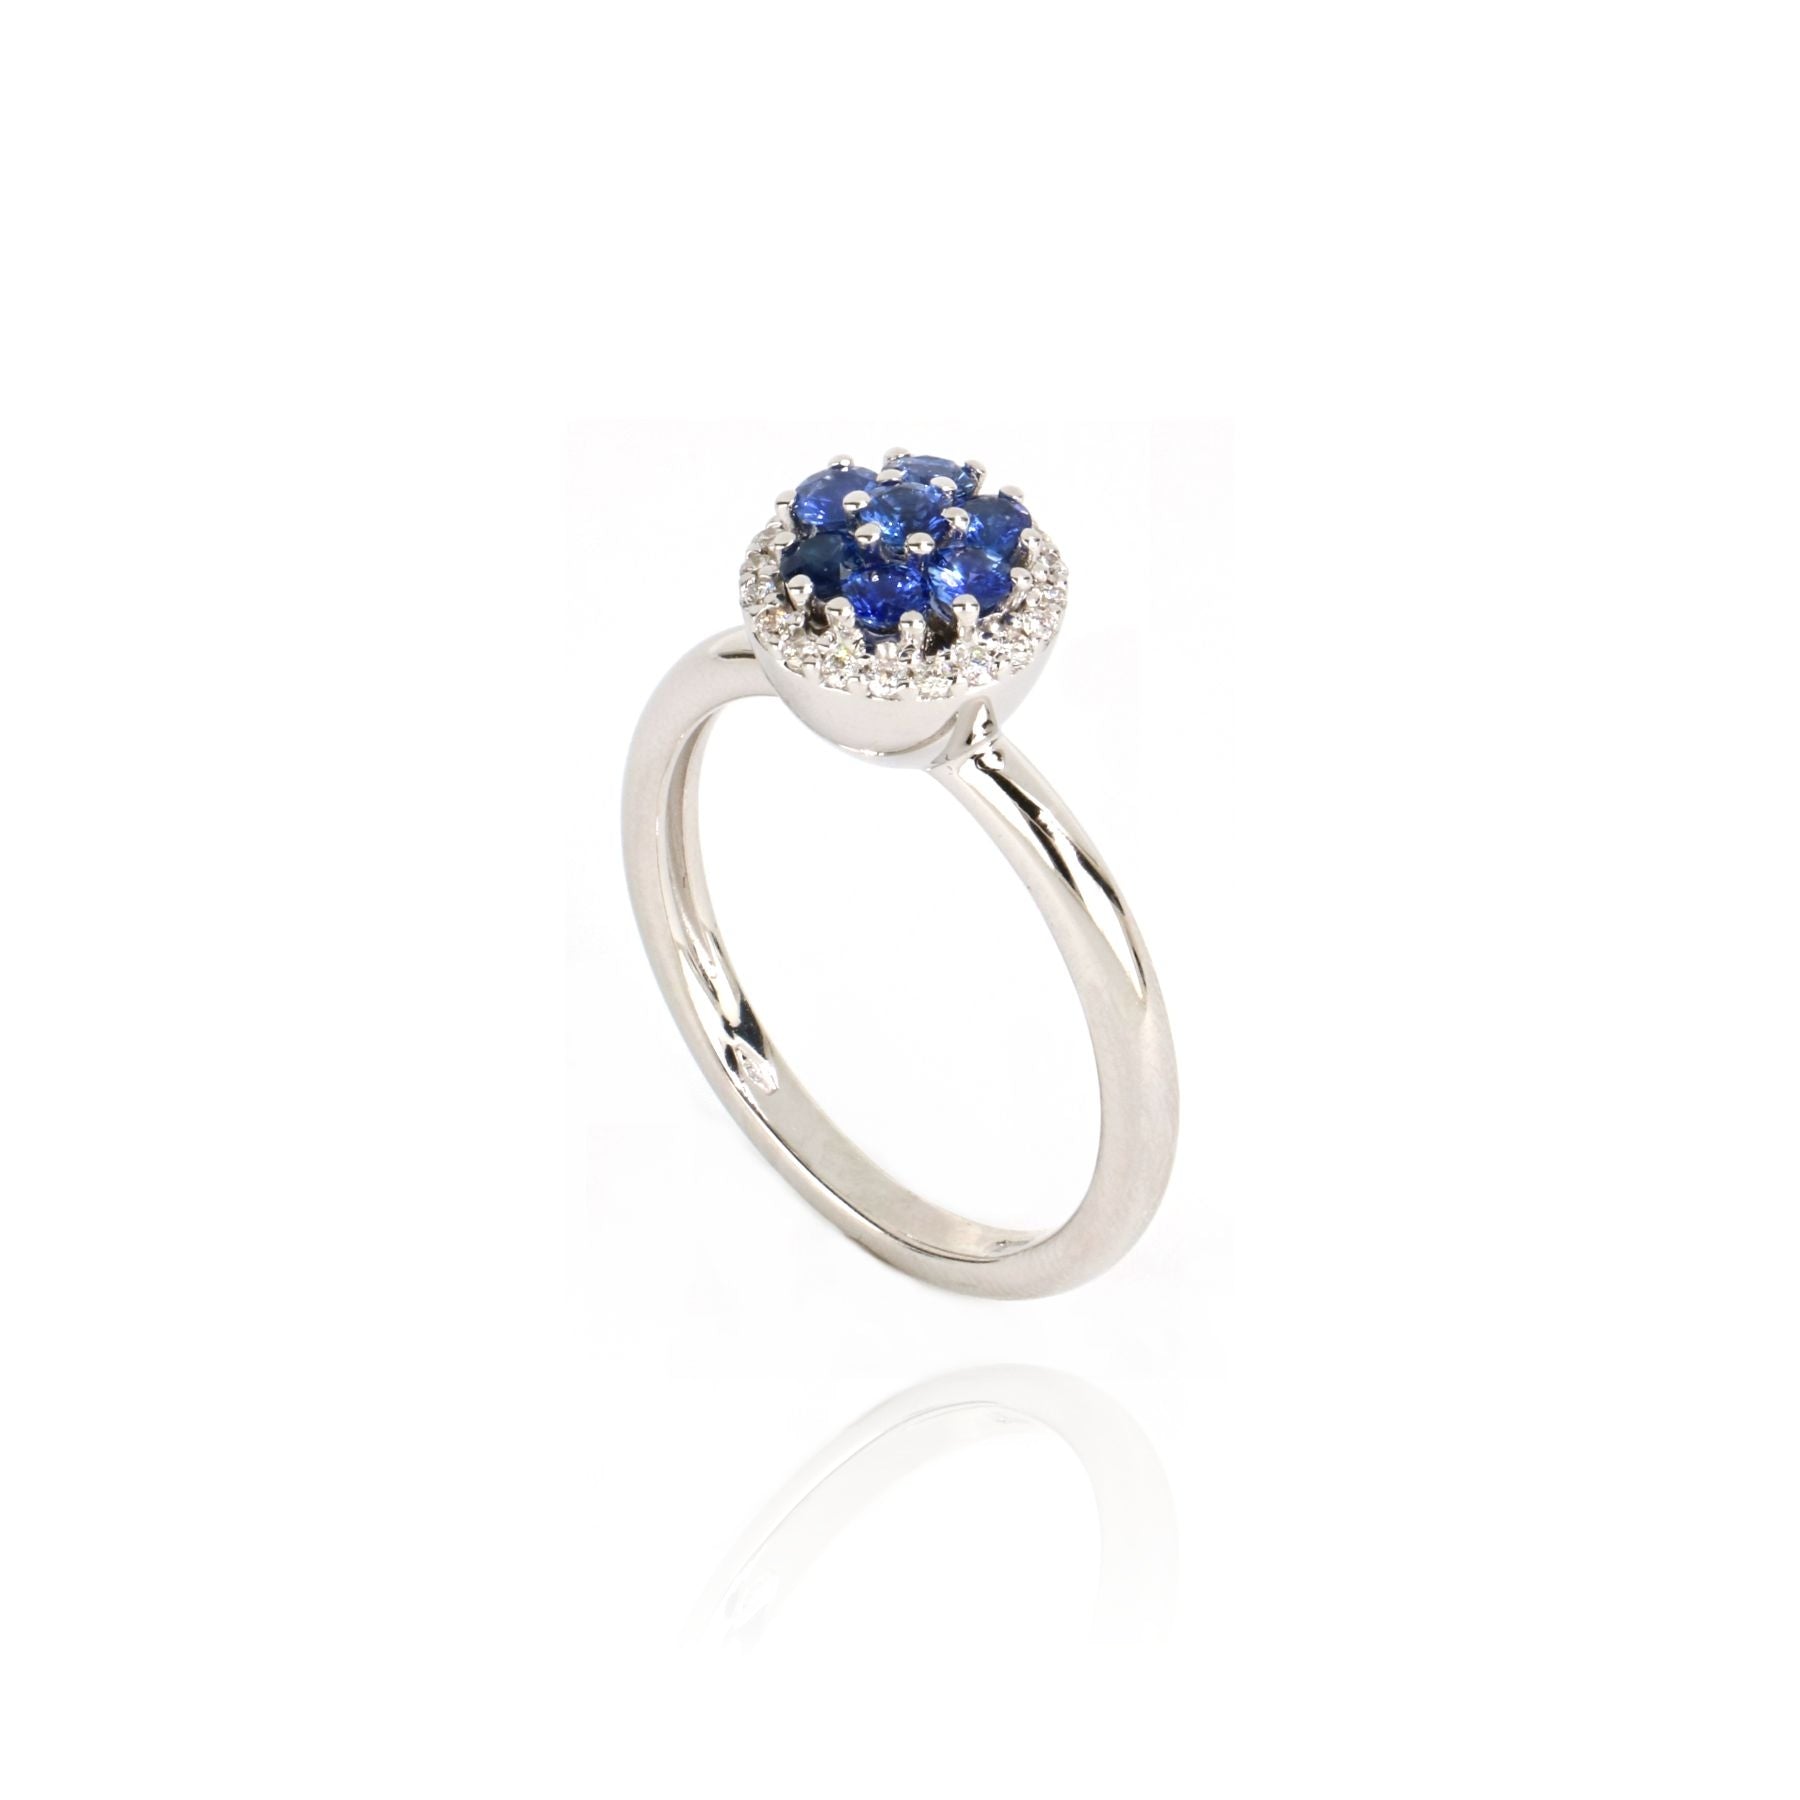 White Gold Ring With Sapphires And Diamonds